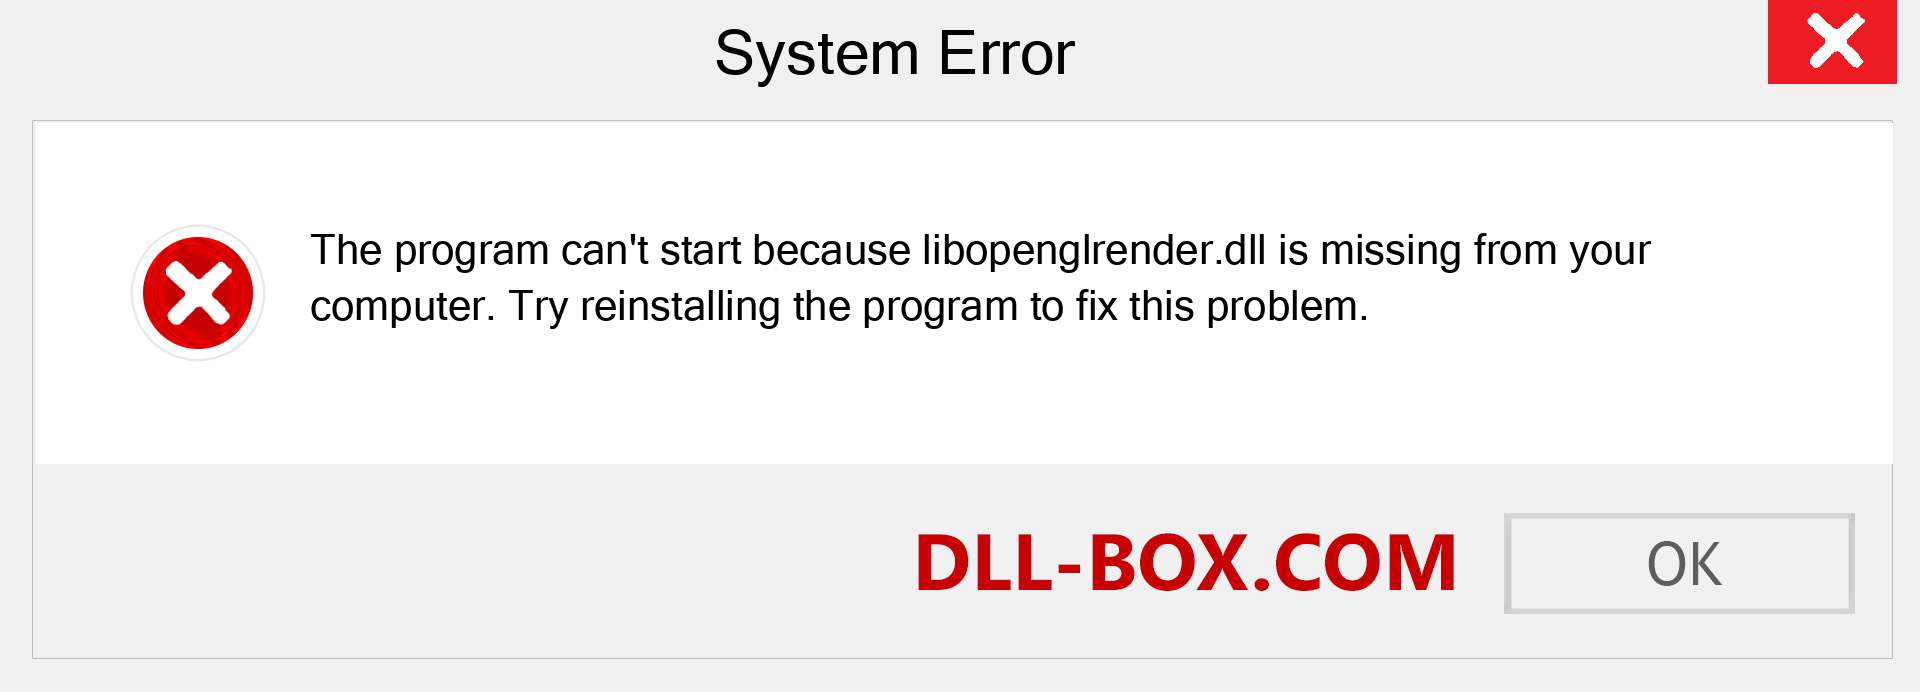  libopenglrender.dll file is missing?. Download for Windows 7, 8, 10 - Fix  libopenglrender dll Missing Error on Windows, photos, images